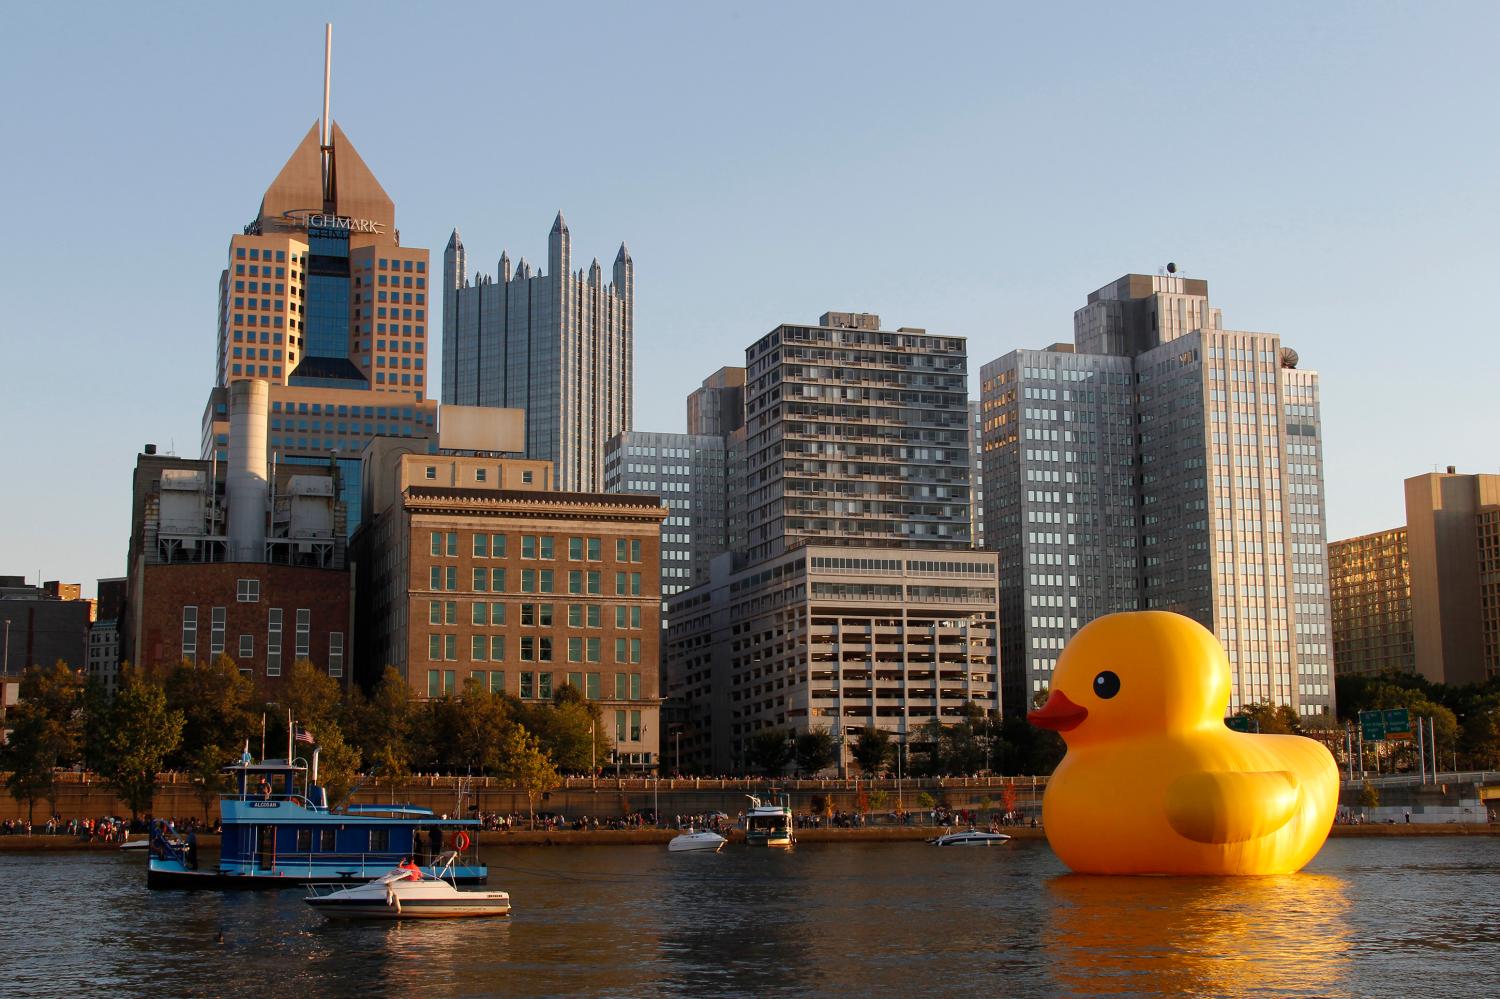 A 40-foot-high (12-metre-high) and 30-foot-wide (nine-metre-wide) inflatable rubber duck, created by Dutch artist Florentijn Hofman, is towed up the Allegheny River in Pittsburgh, Pennsylvania September 27, 2013. The event marks the North American debut of Hofman's Rubber Duck Project, which has taken place in other cities in Asia, Europe, Australia and South America. REUTERS/Jason Cohn (UNITED STATES - Tags: SOCIETY TPX IMAGES OF THE DAY) - GM1E99S0NDL01